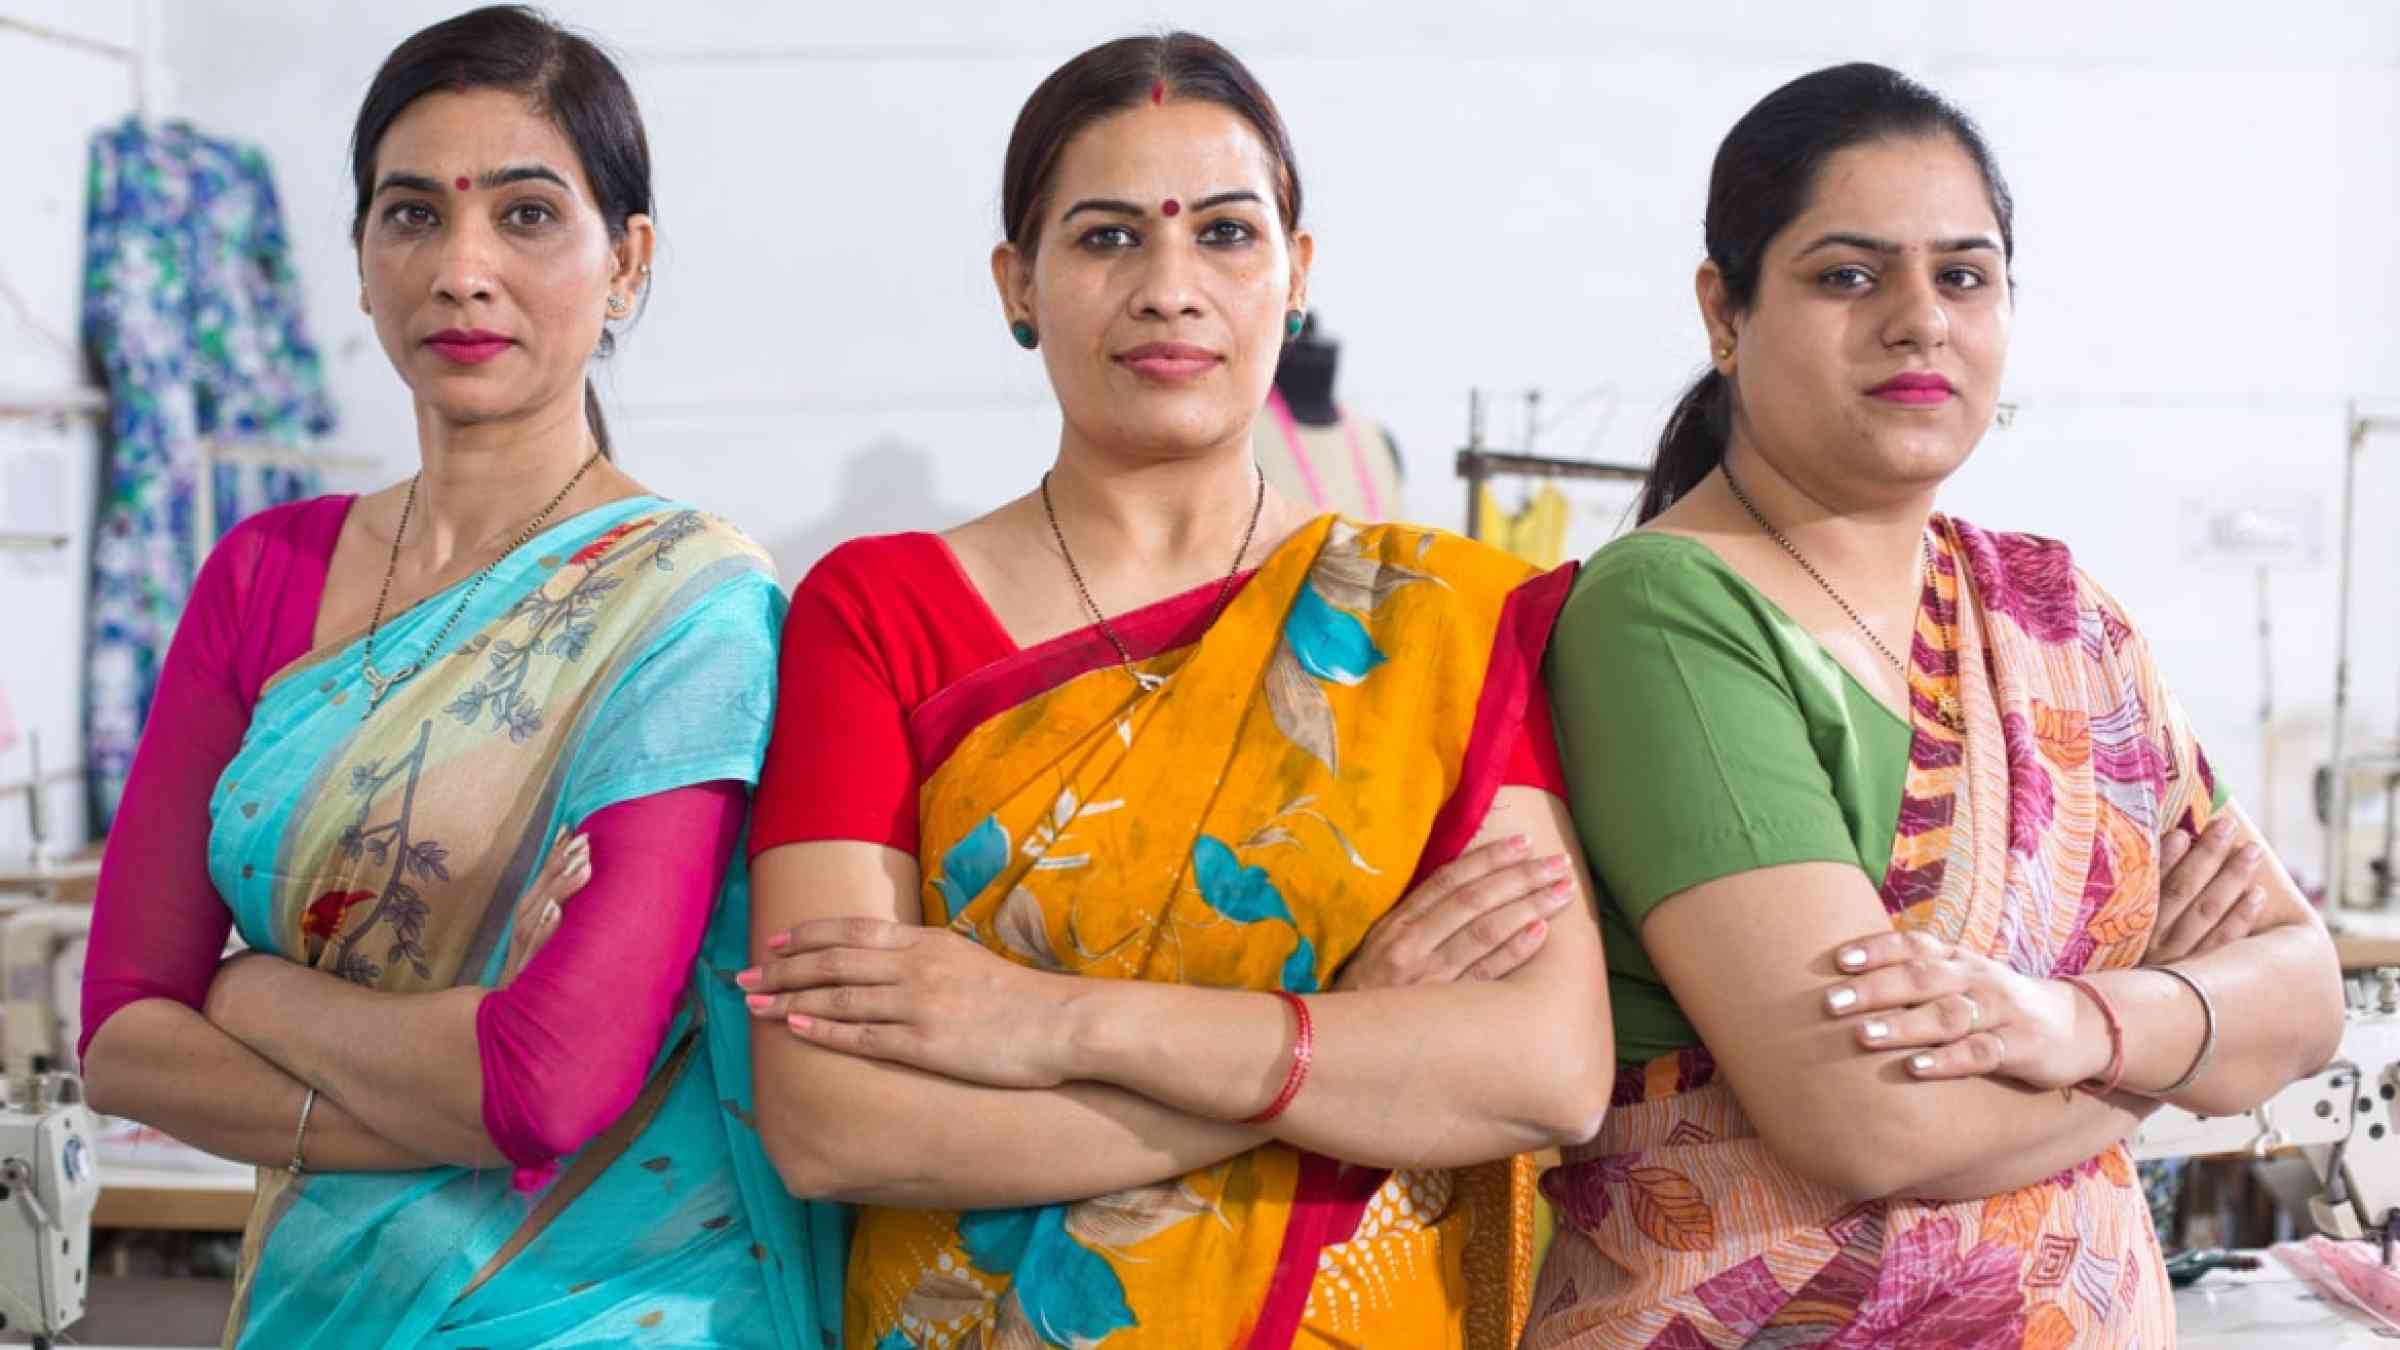 Three Indian female textile workers standing together in solidarity at factory